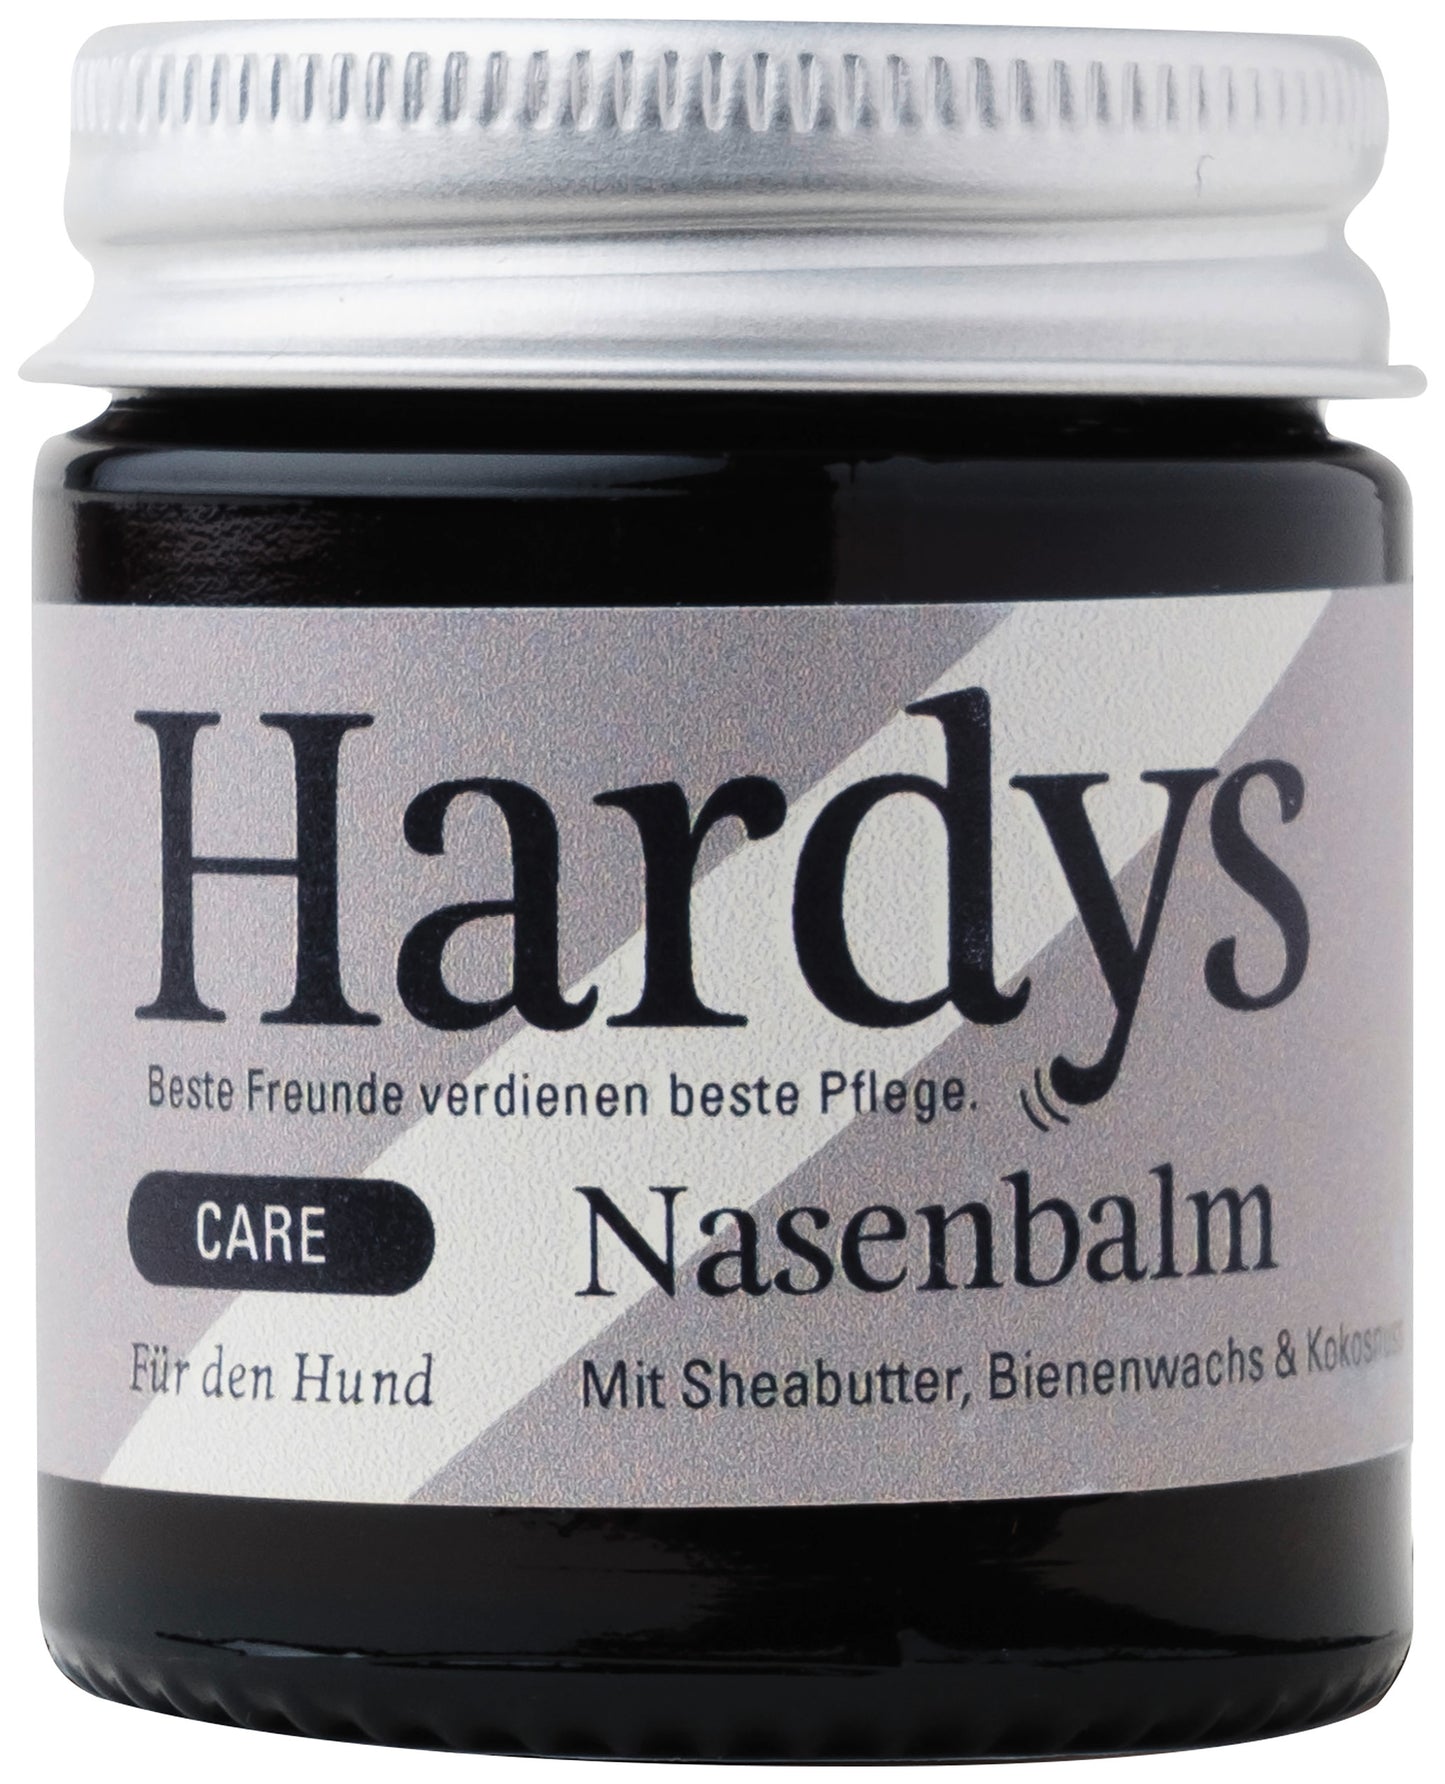 Hardys nose balm with shea butter 30g